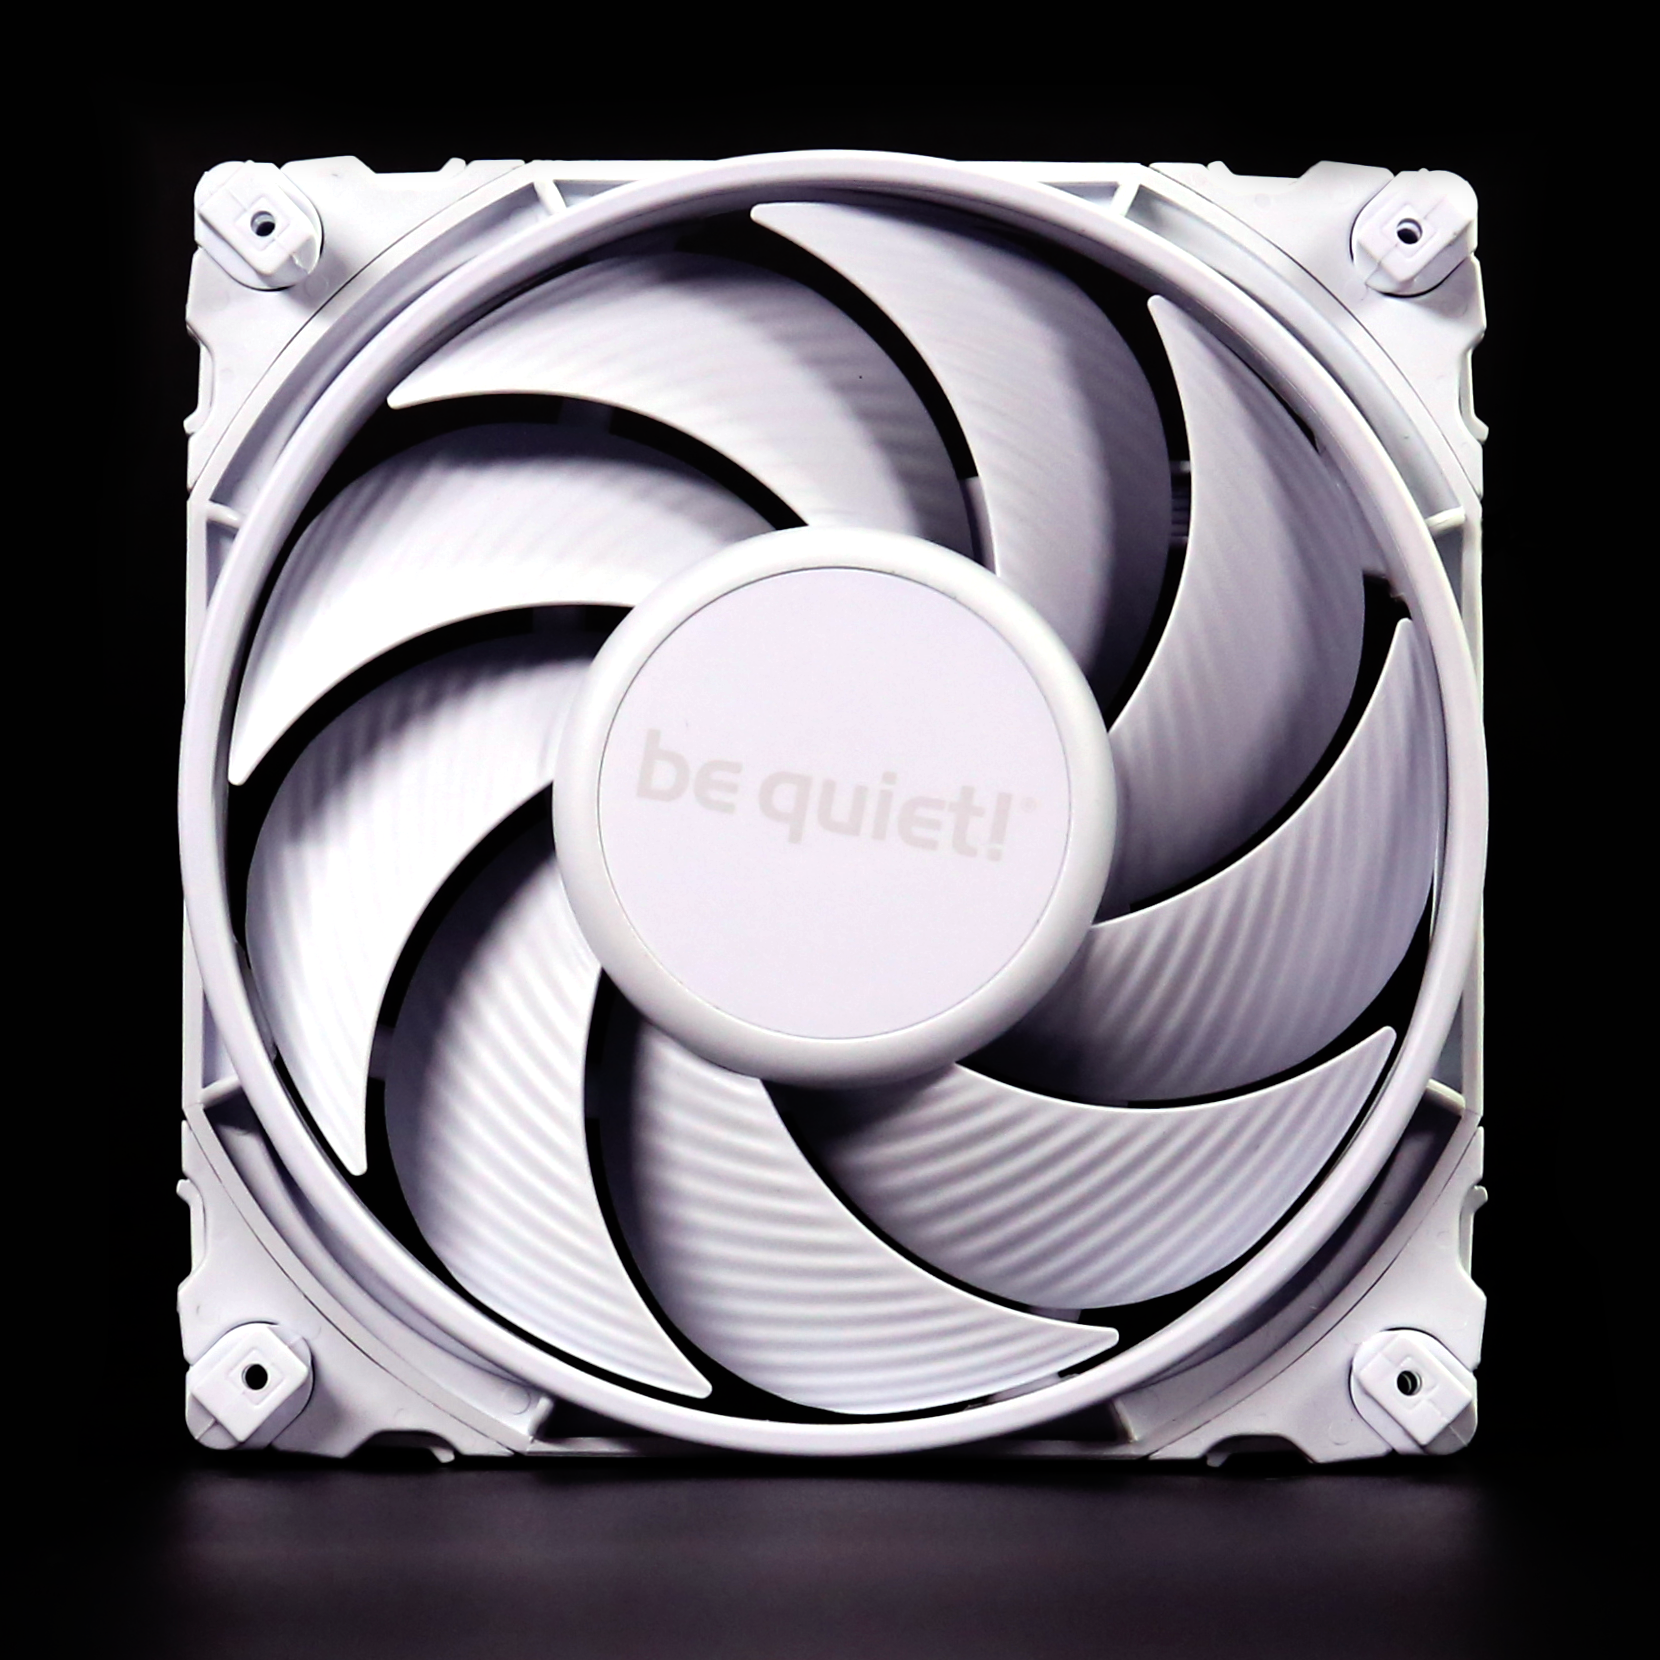 be quiet! Silent Wings 4 120mm PWM high-speed White